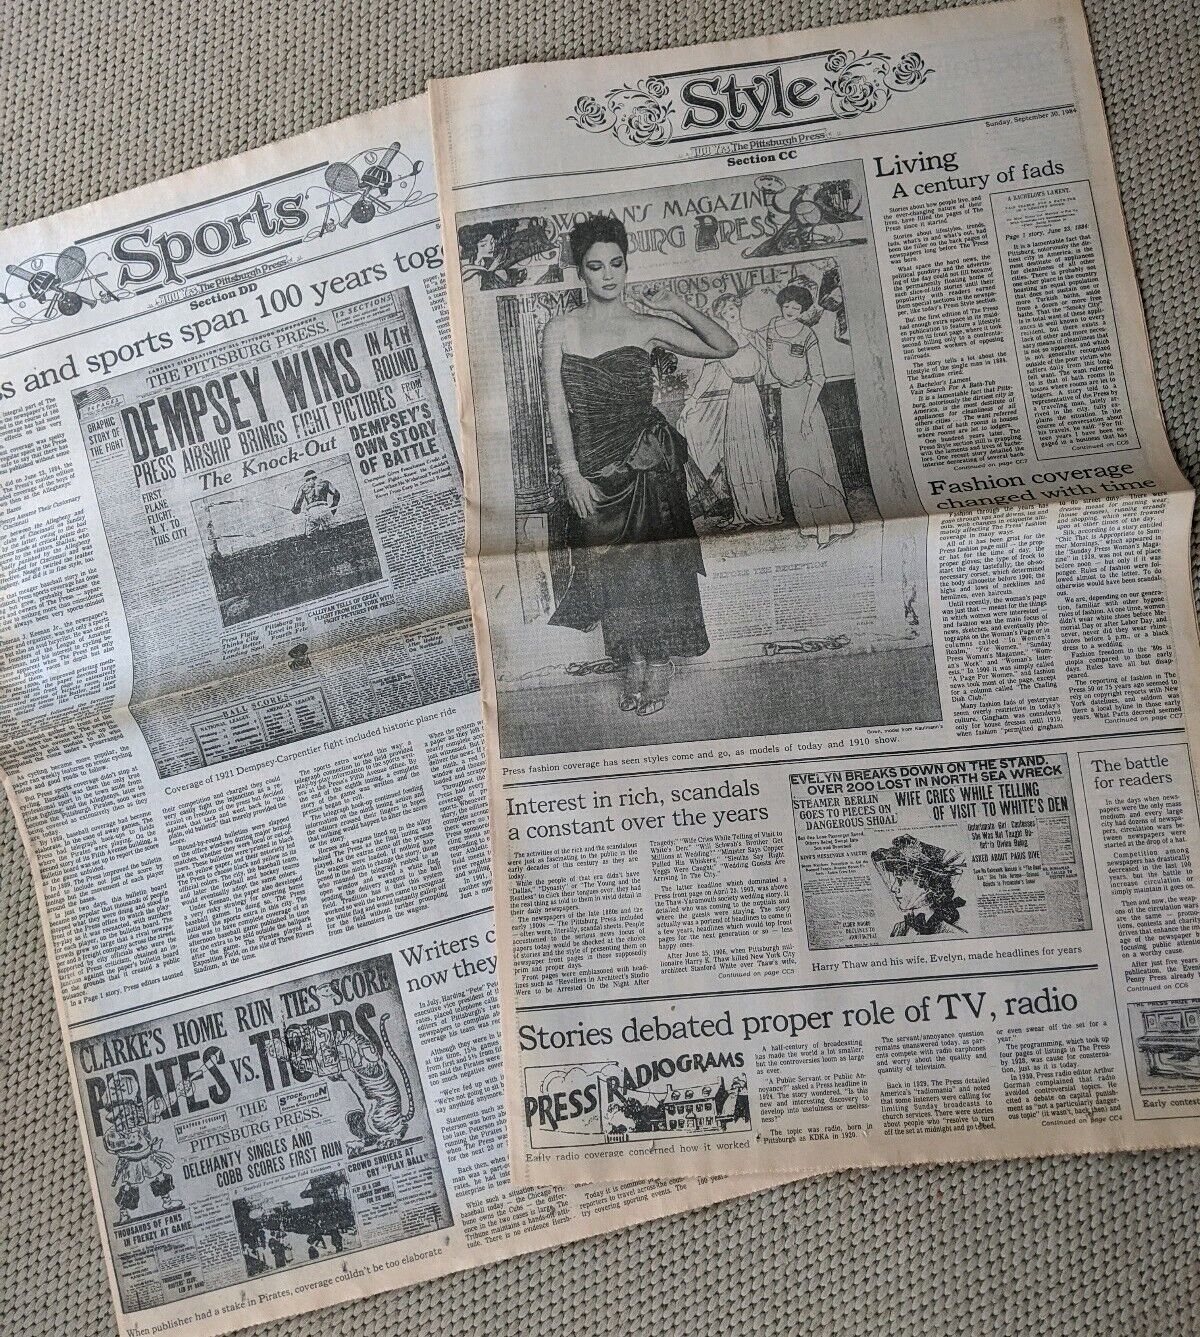 PITTSBURGH PRESS Sep 30, 1984 Style & Sports 100 Year Anniversary of Newspaper